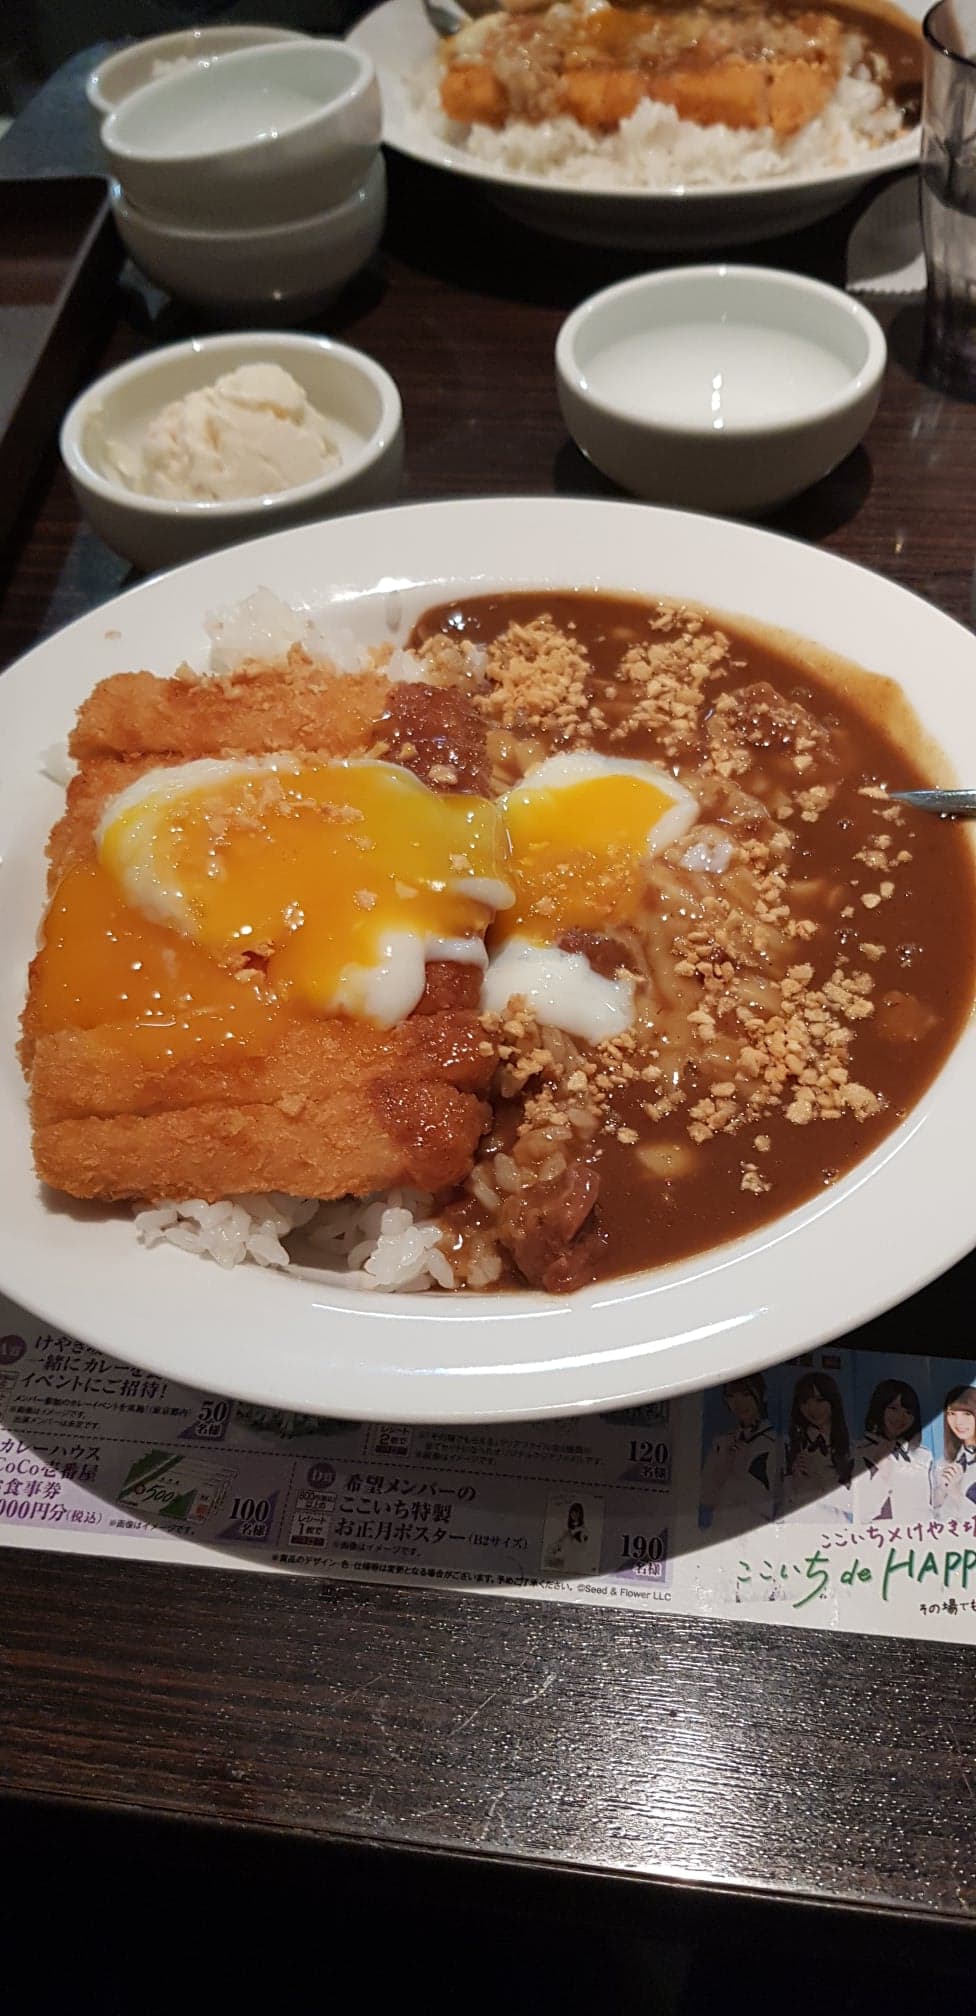 The world’s tastiest curry? A review of Coco Ichibanya